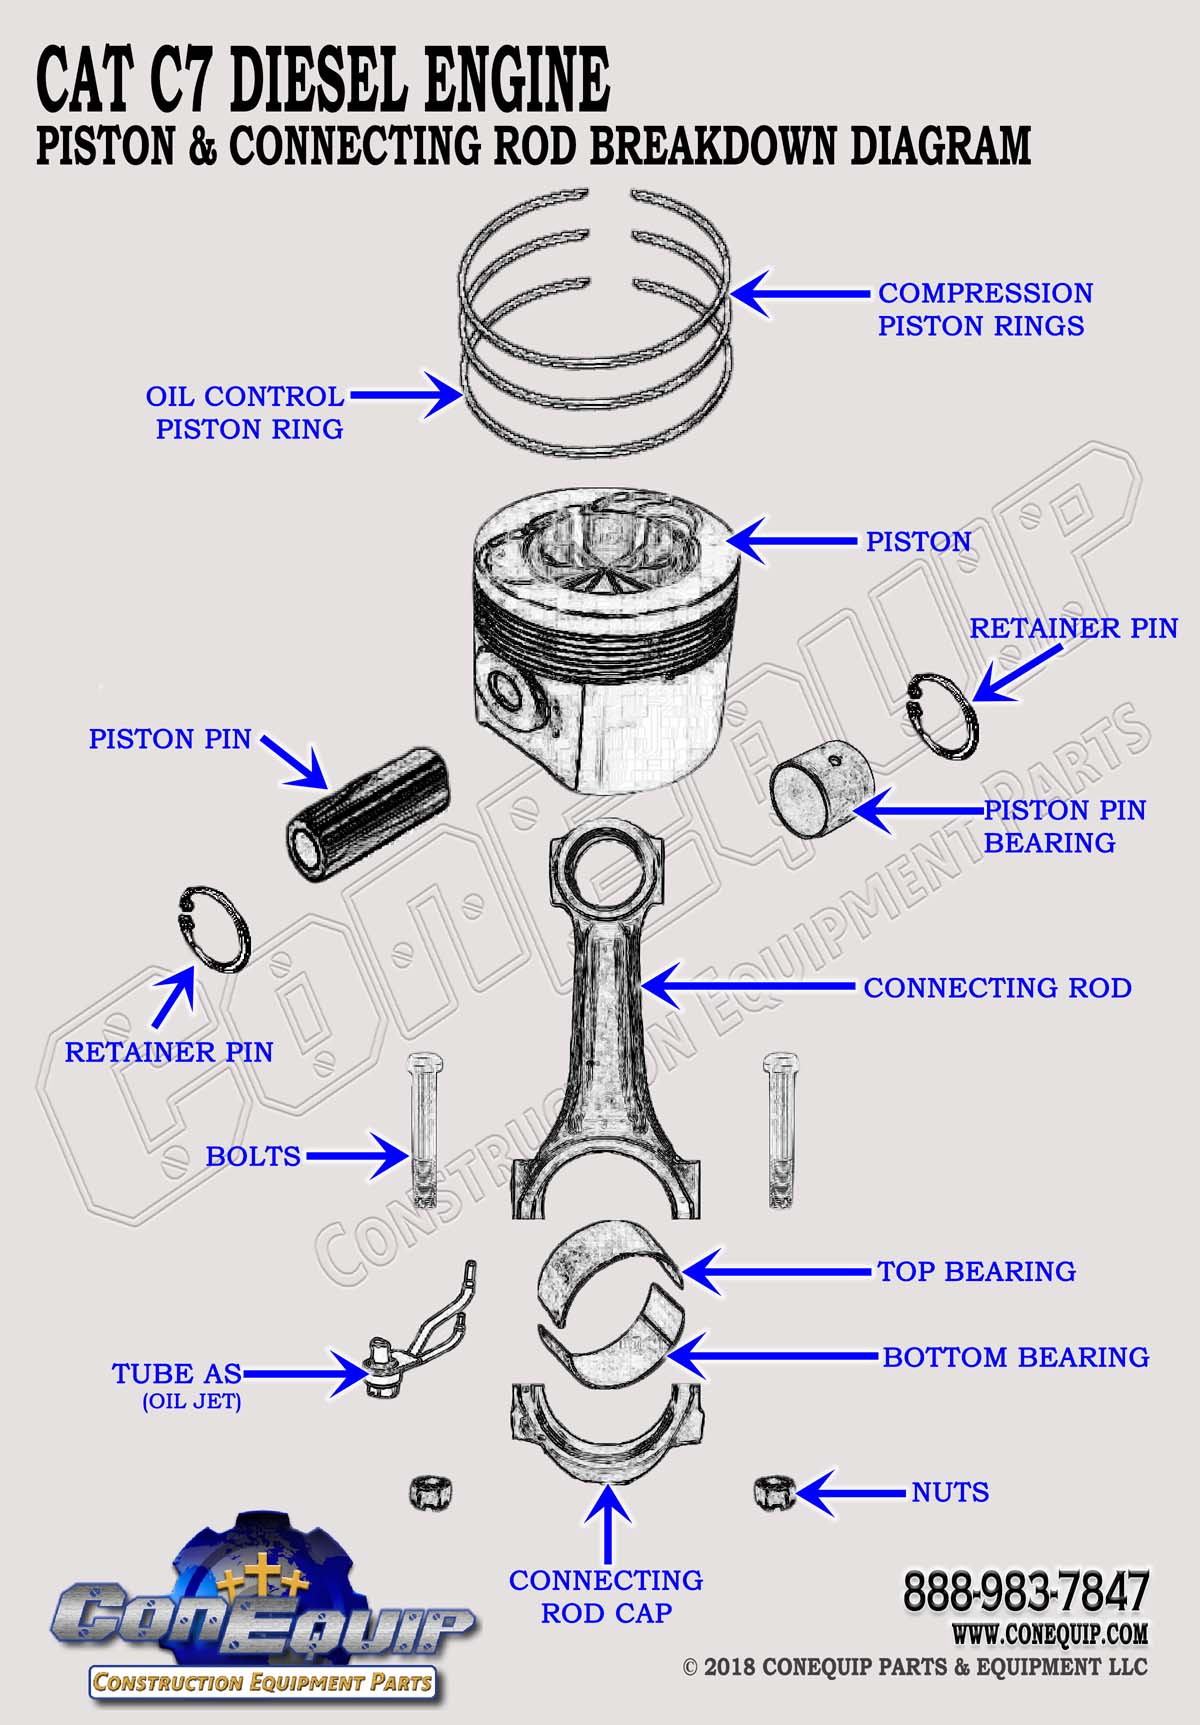 CAT C7 piston connecting rod assembly